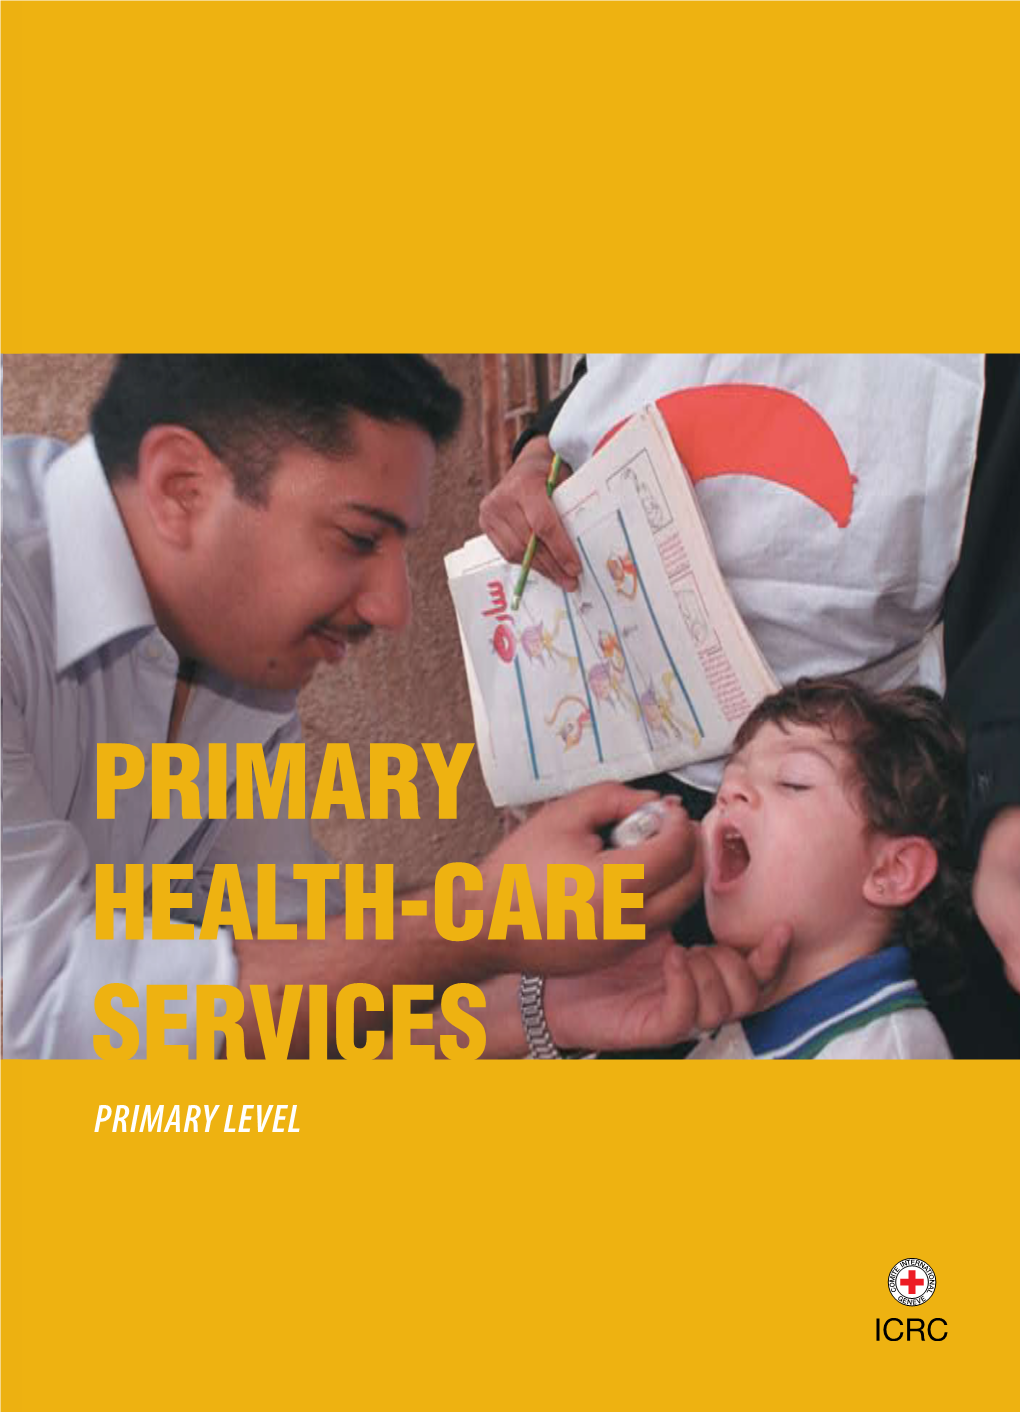 Primary Health-Care Services Table of Contents